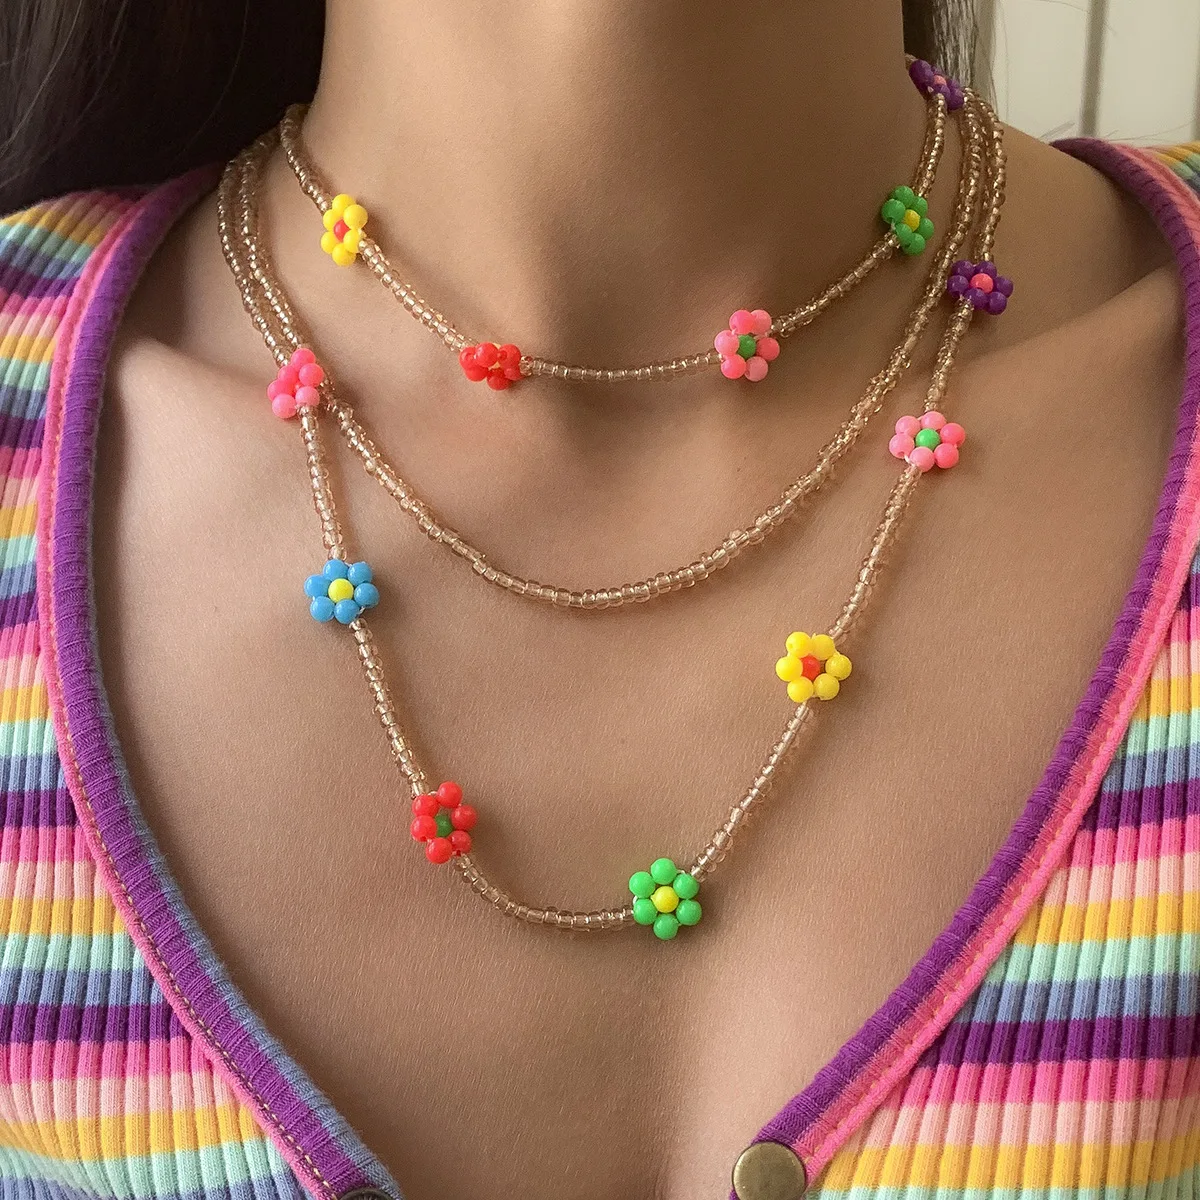 

Multilayer New Korea Lovely Daisy Flower Colorful Beaded Charm Statement Short Choker Necklace for Women Girls Beads Jewelry